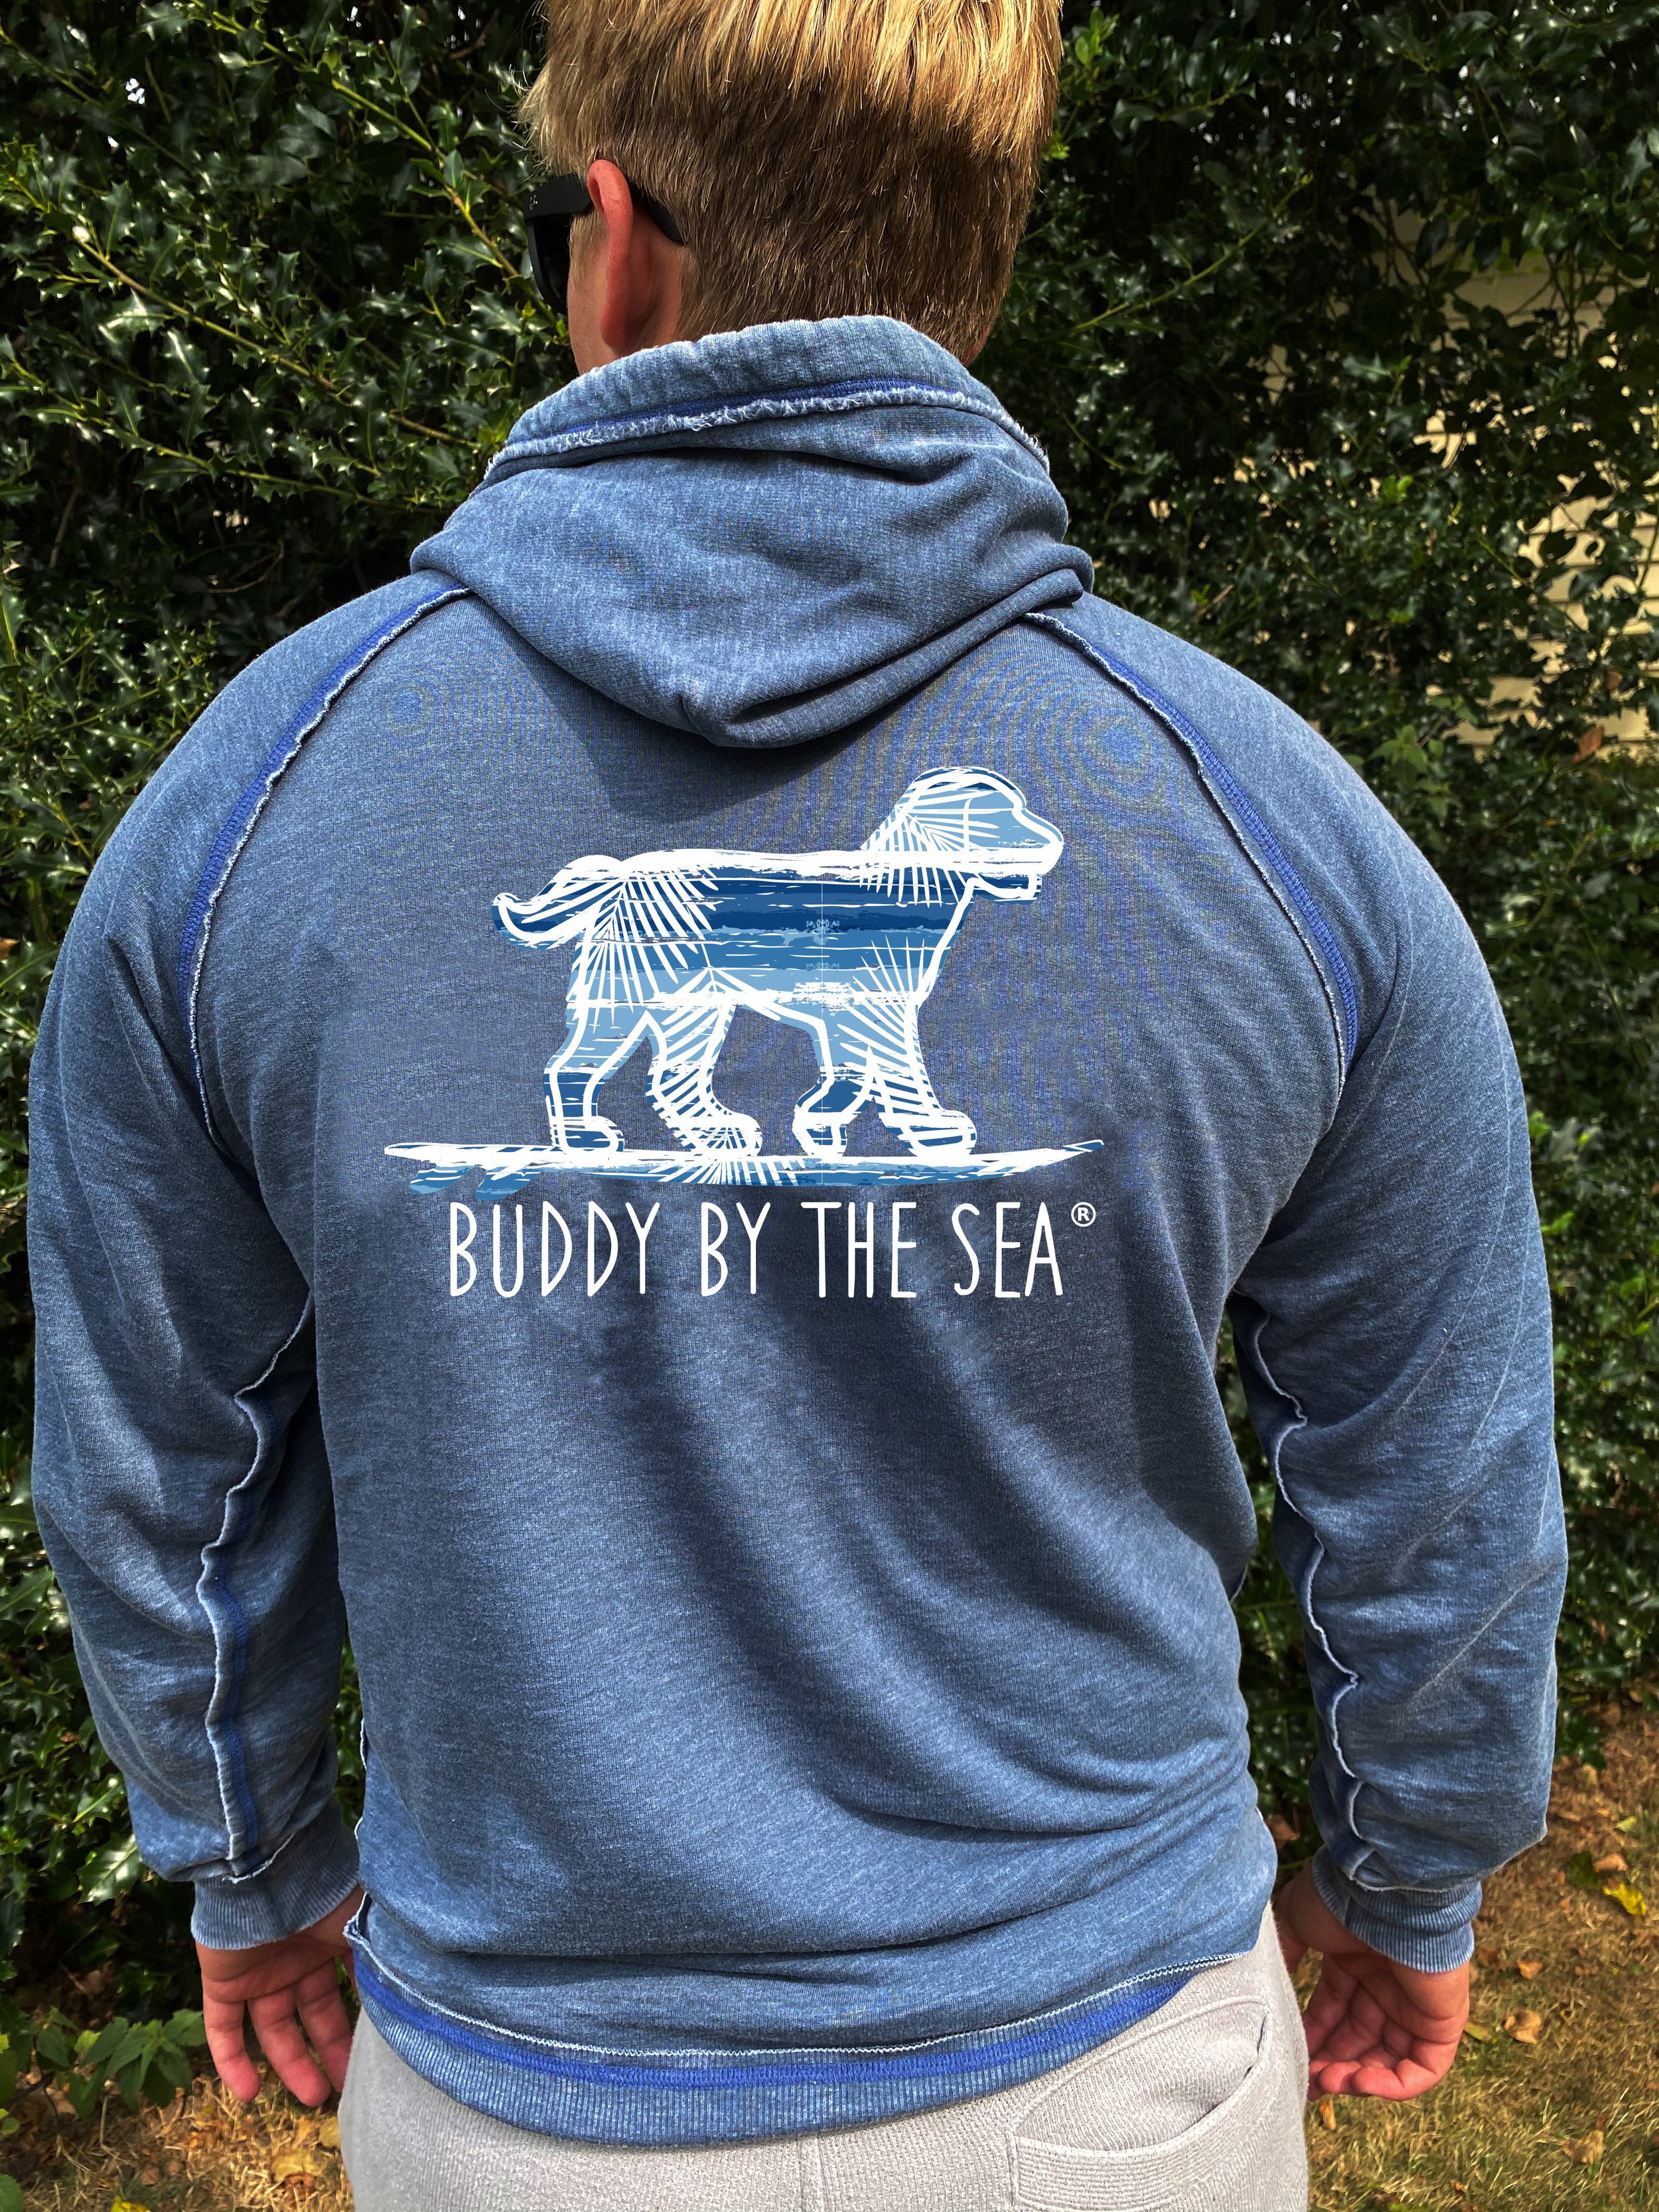 Shop — Buddy by the Sea